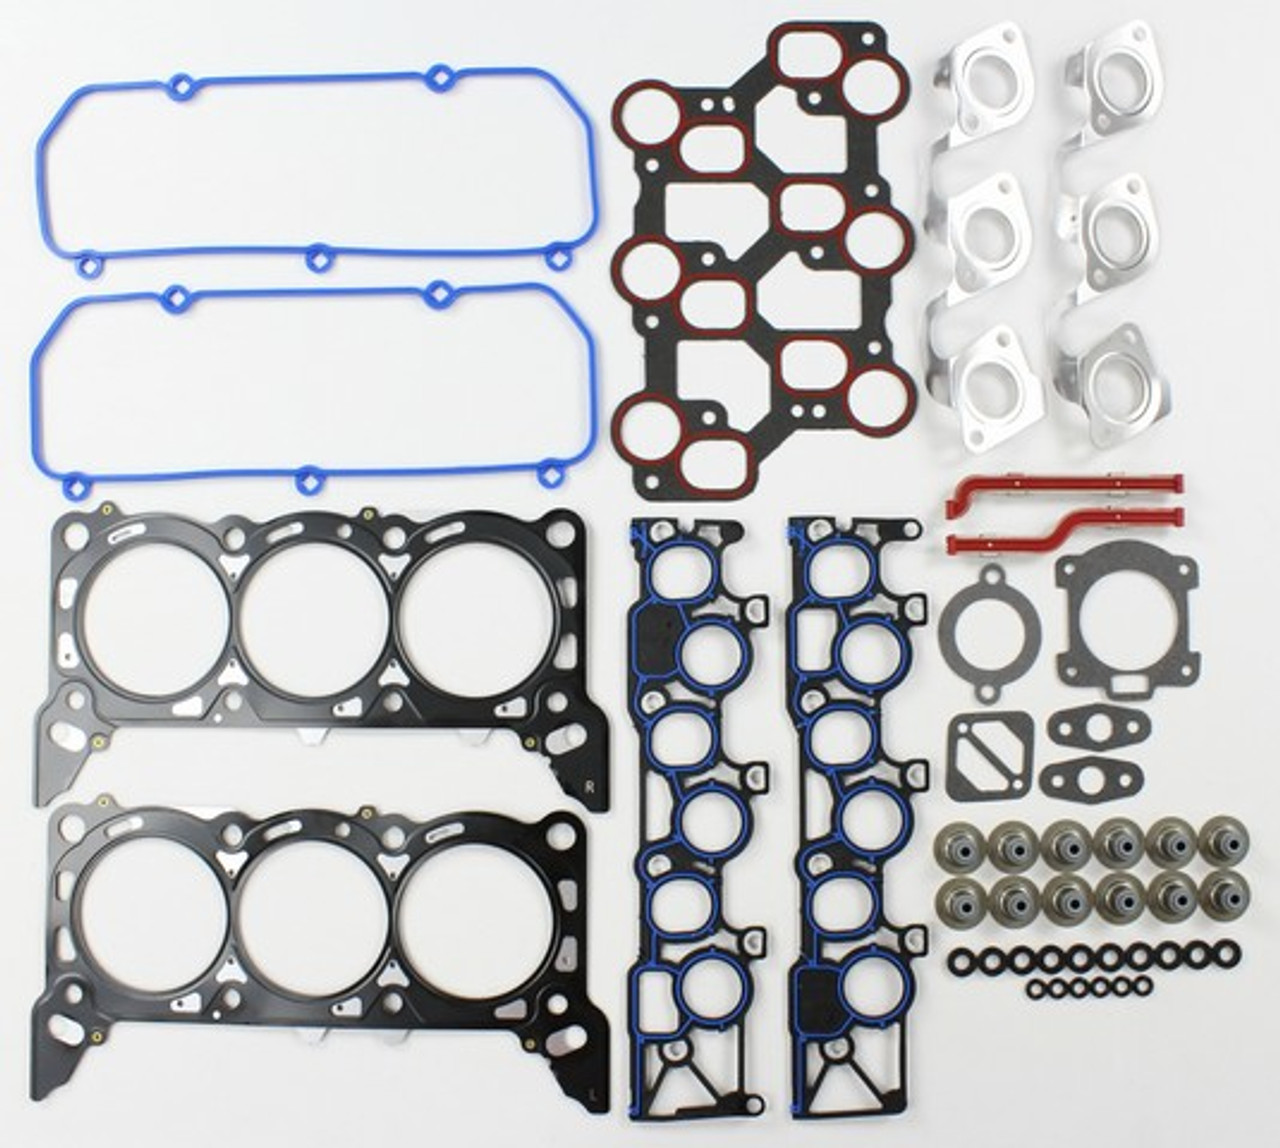 Head Gasket Set 3.8L 2001 Ford Mustang - HGS4120.15